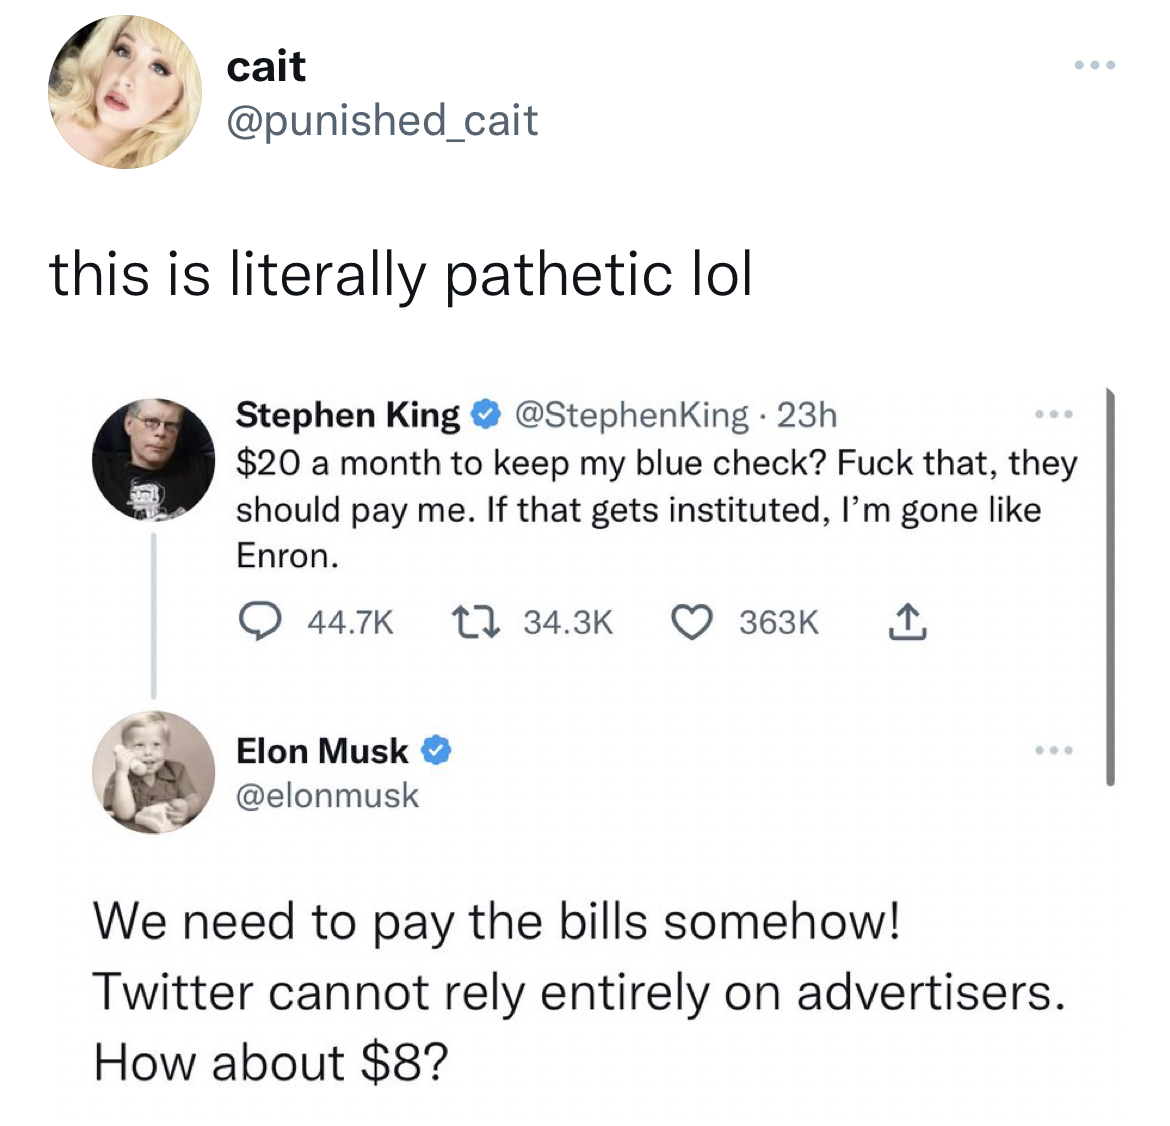 Celebs get roasted on twitter - body jewelry - cait this is literally pathetic lol Stephen King . 23h $20 a month to keep my blue check? Fuck that, they should pay me. If that gets instituted, I'm gone Enron. Elon Musk We need to pay the bills somehow! Tw